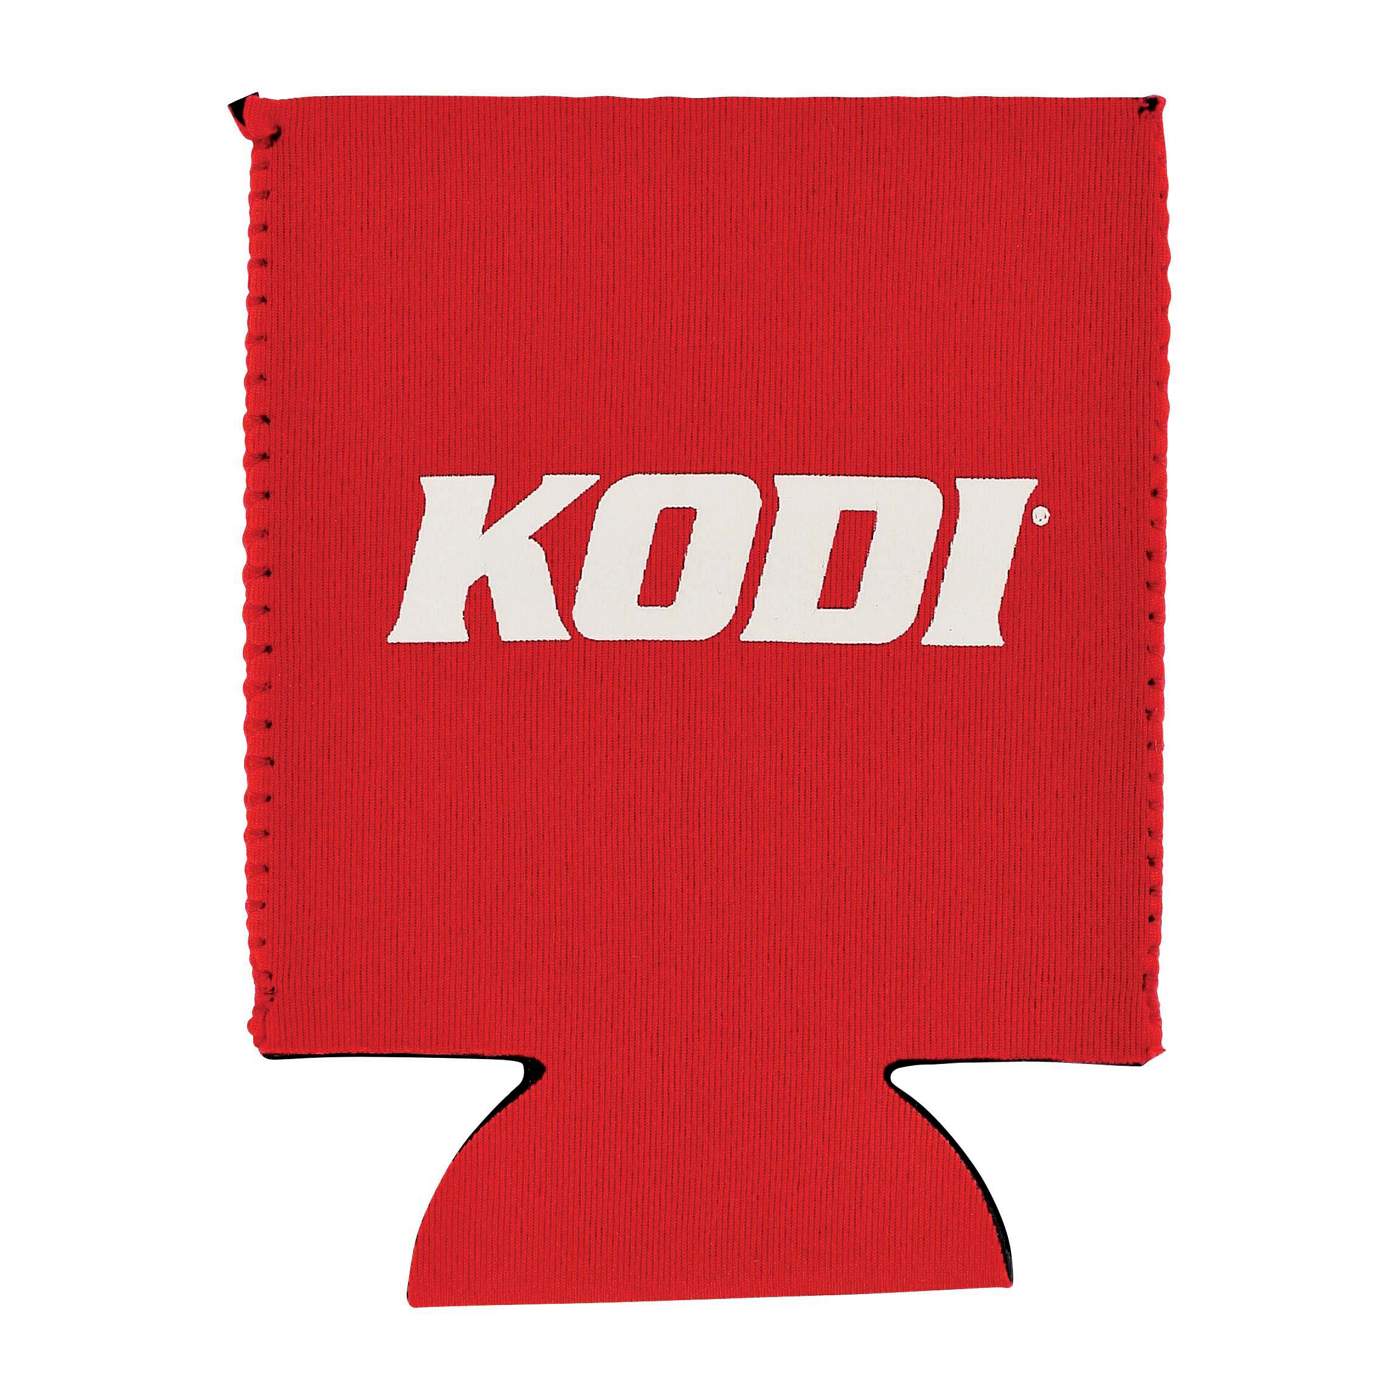 KODI by H-E-B Expeditions Regular Can Neoprene Insulator - Red; image 1 of 2